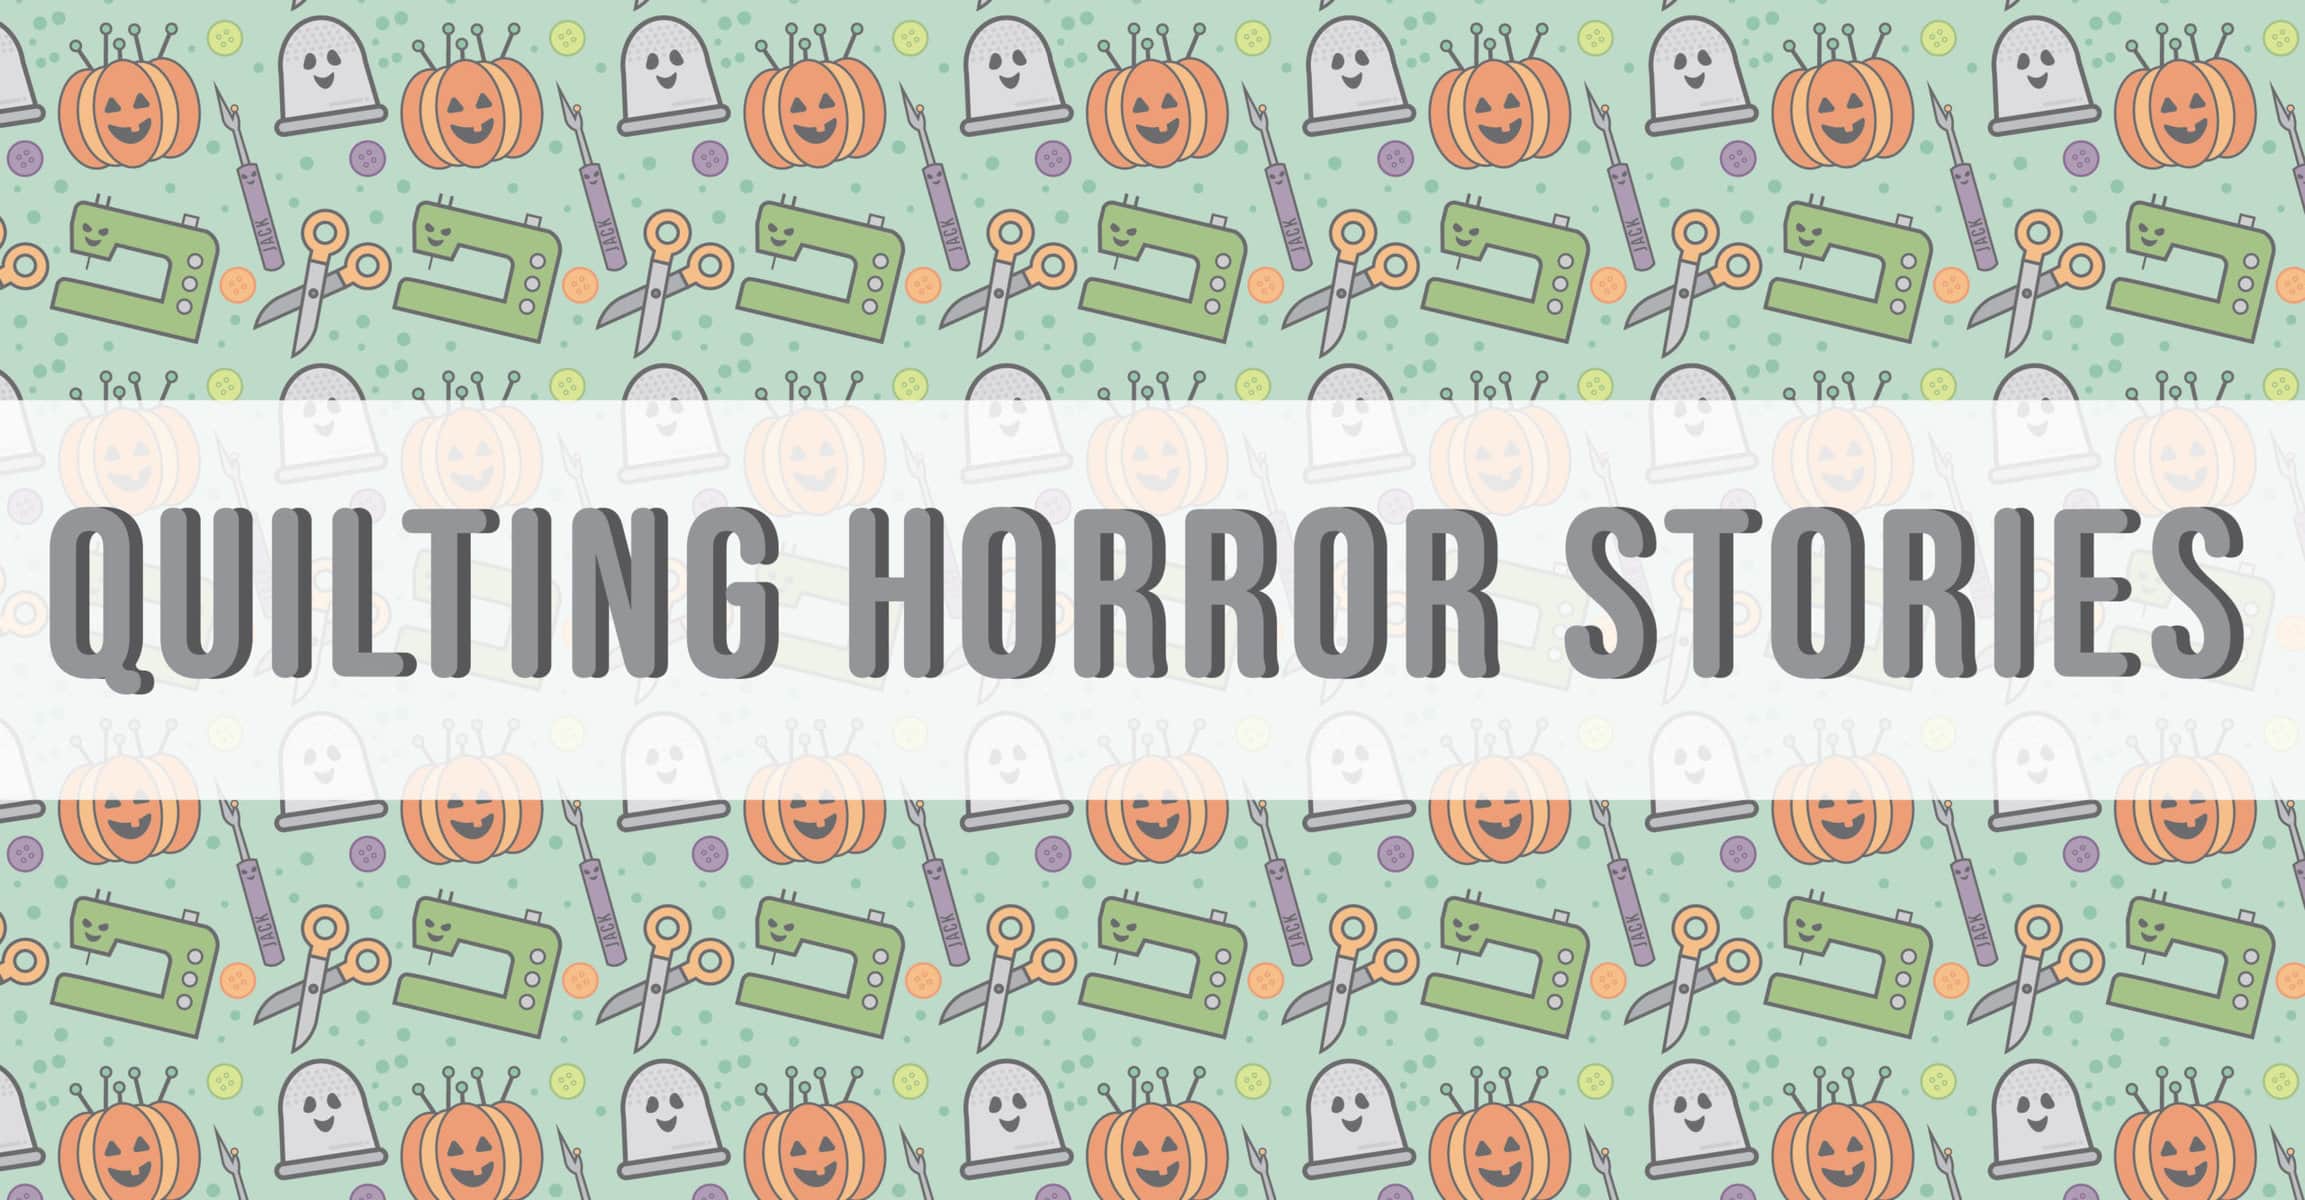 Quilting Horror Stories (and a giveaway!) - The Jolly Jabber Quilting Blog